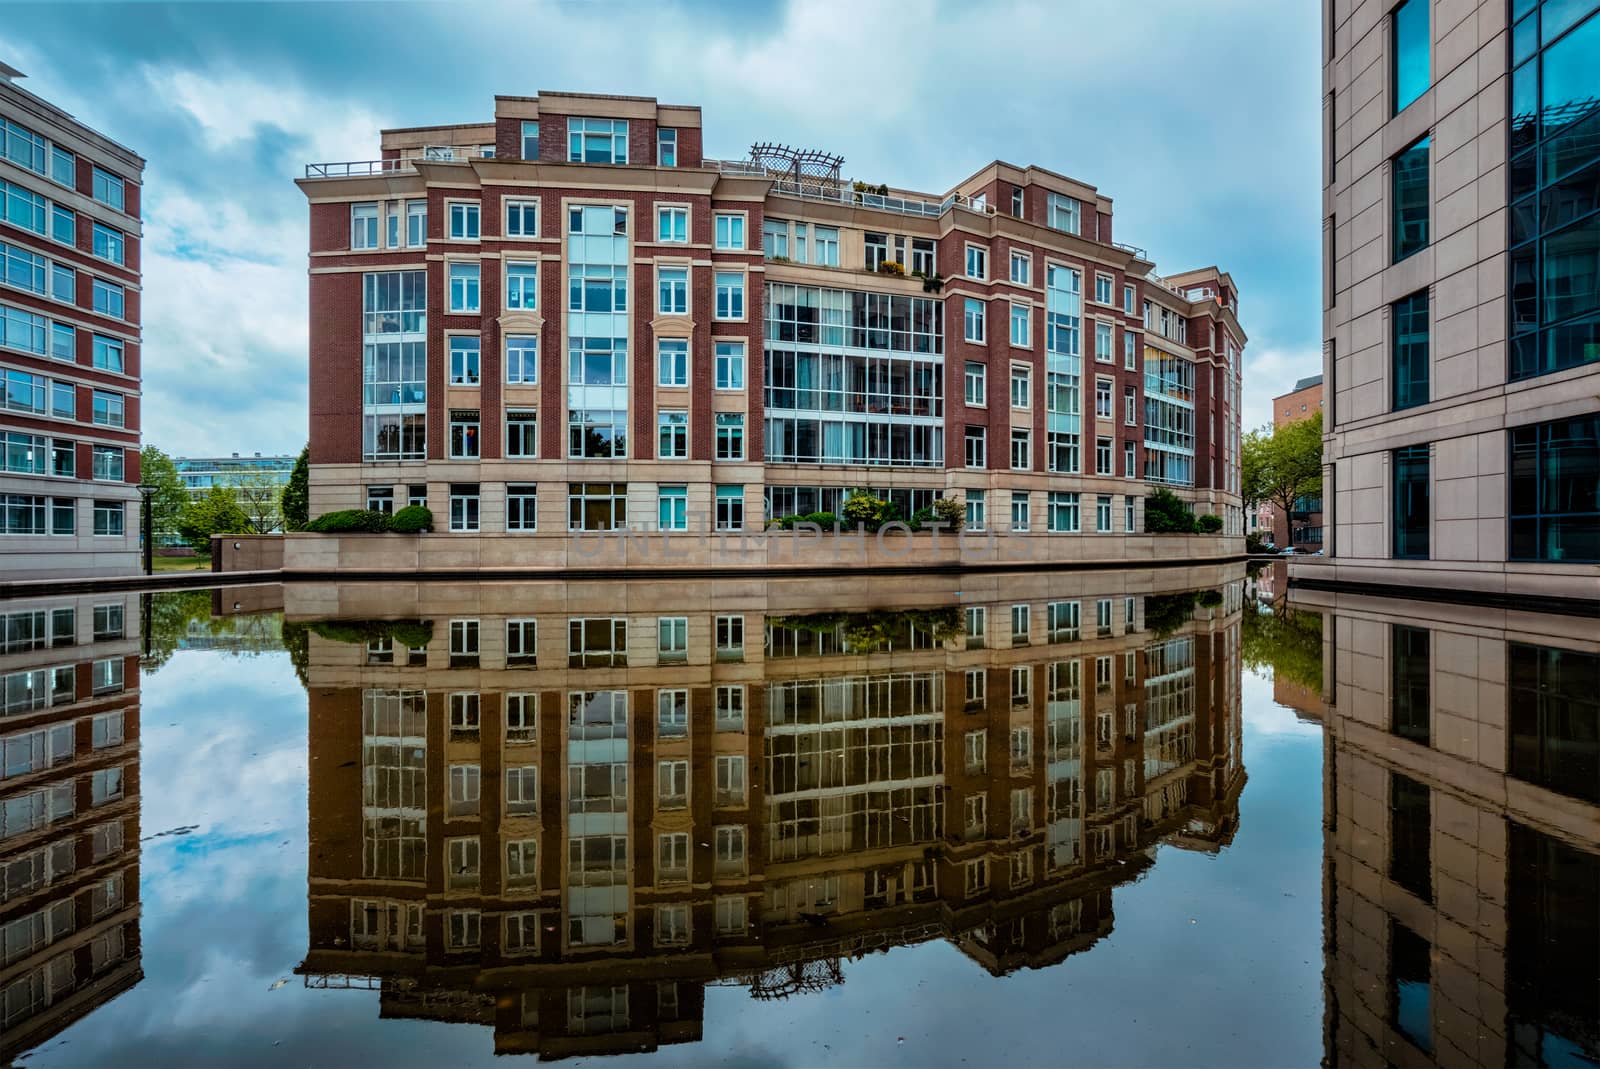 Modern apartment building house with reflection. The Hague, Netherlands